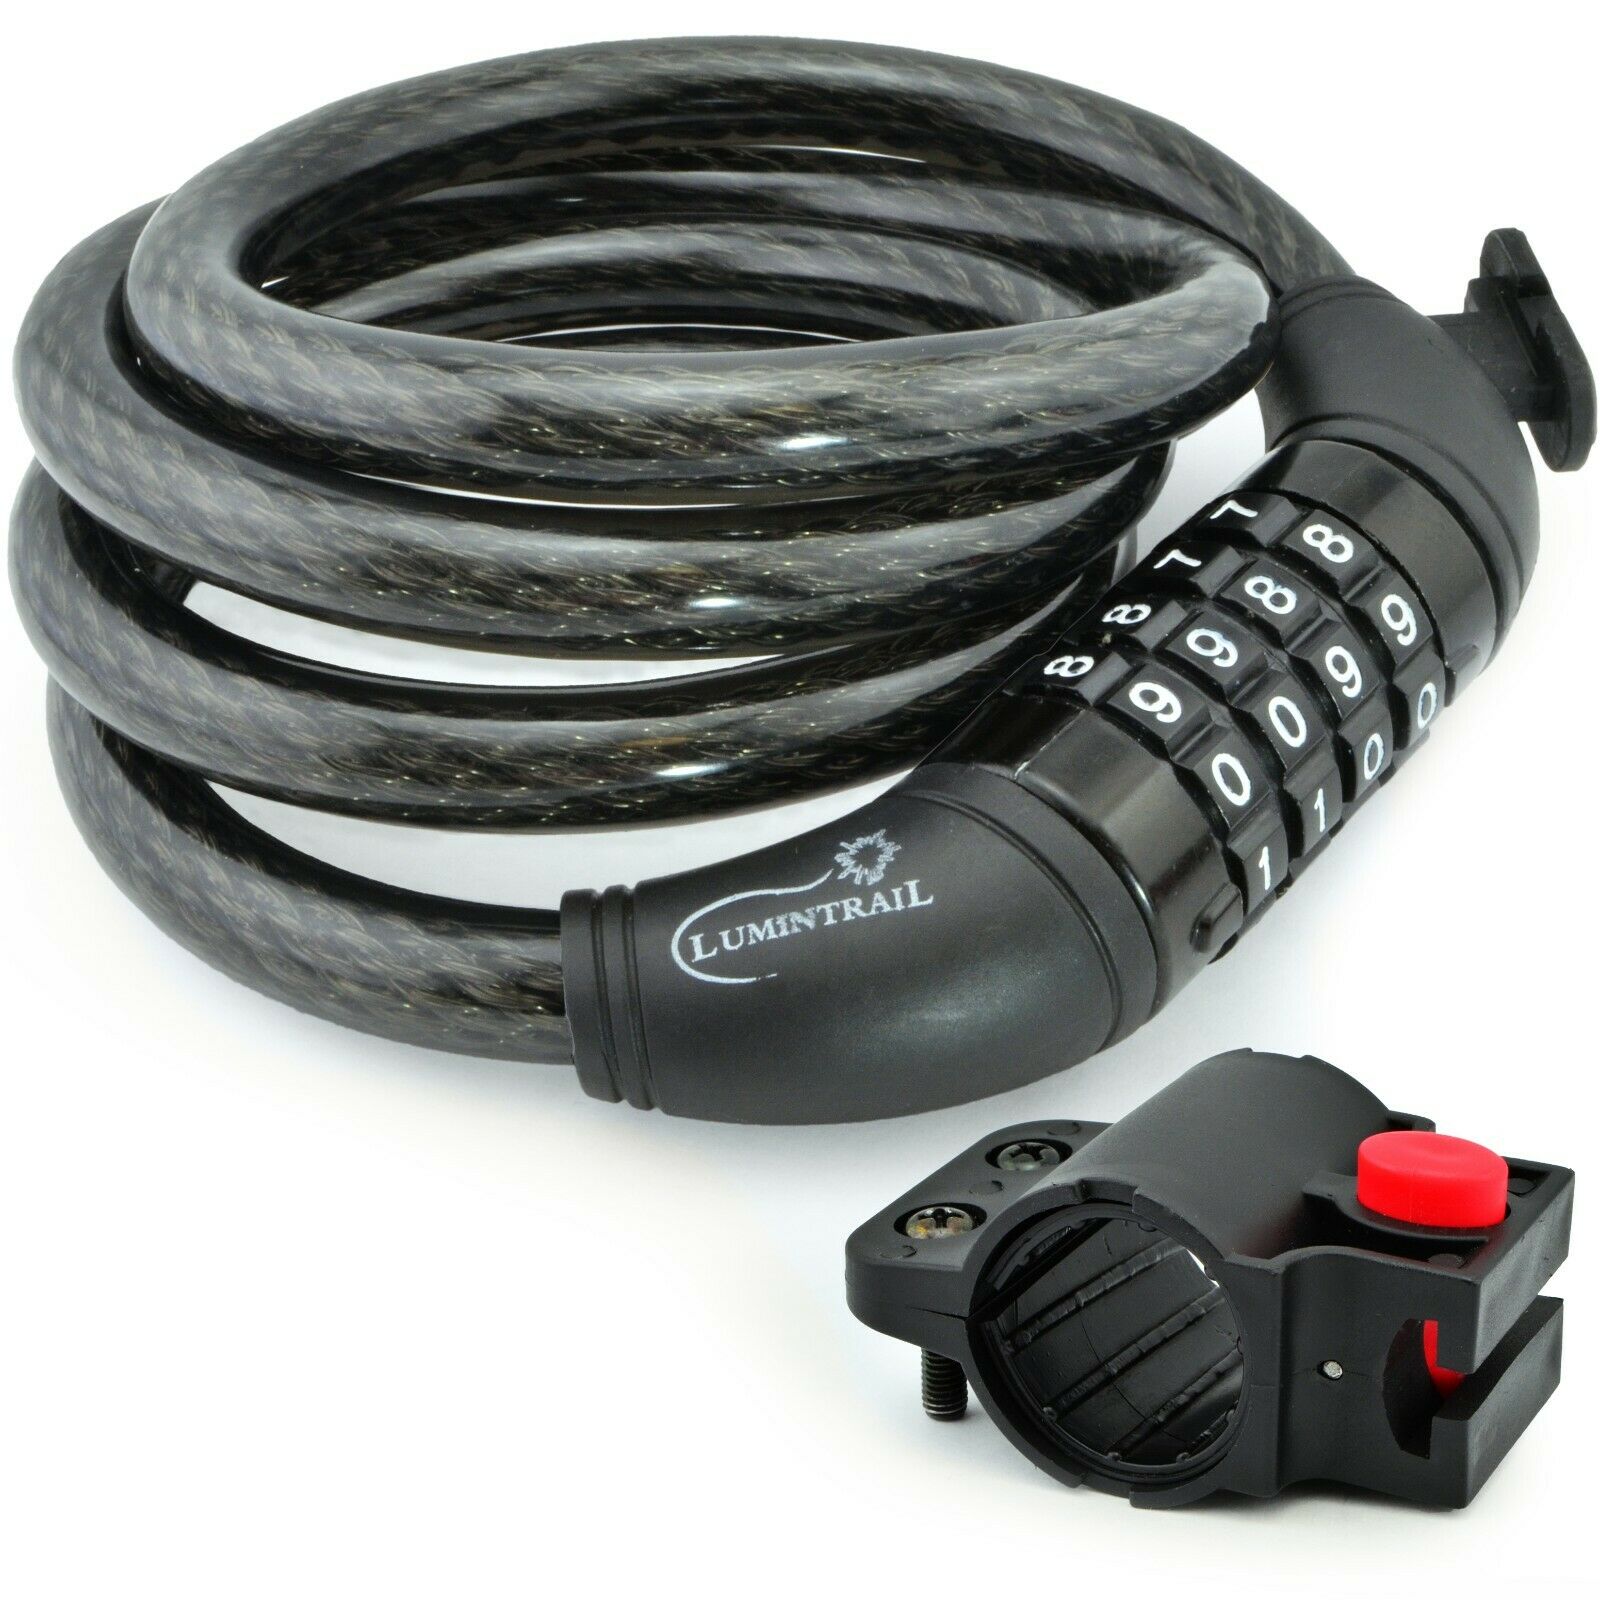 Lumintrail Security 4 Digit Combination Bike Cable Lock With Mounting Bracket